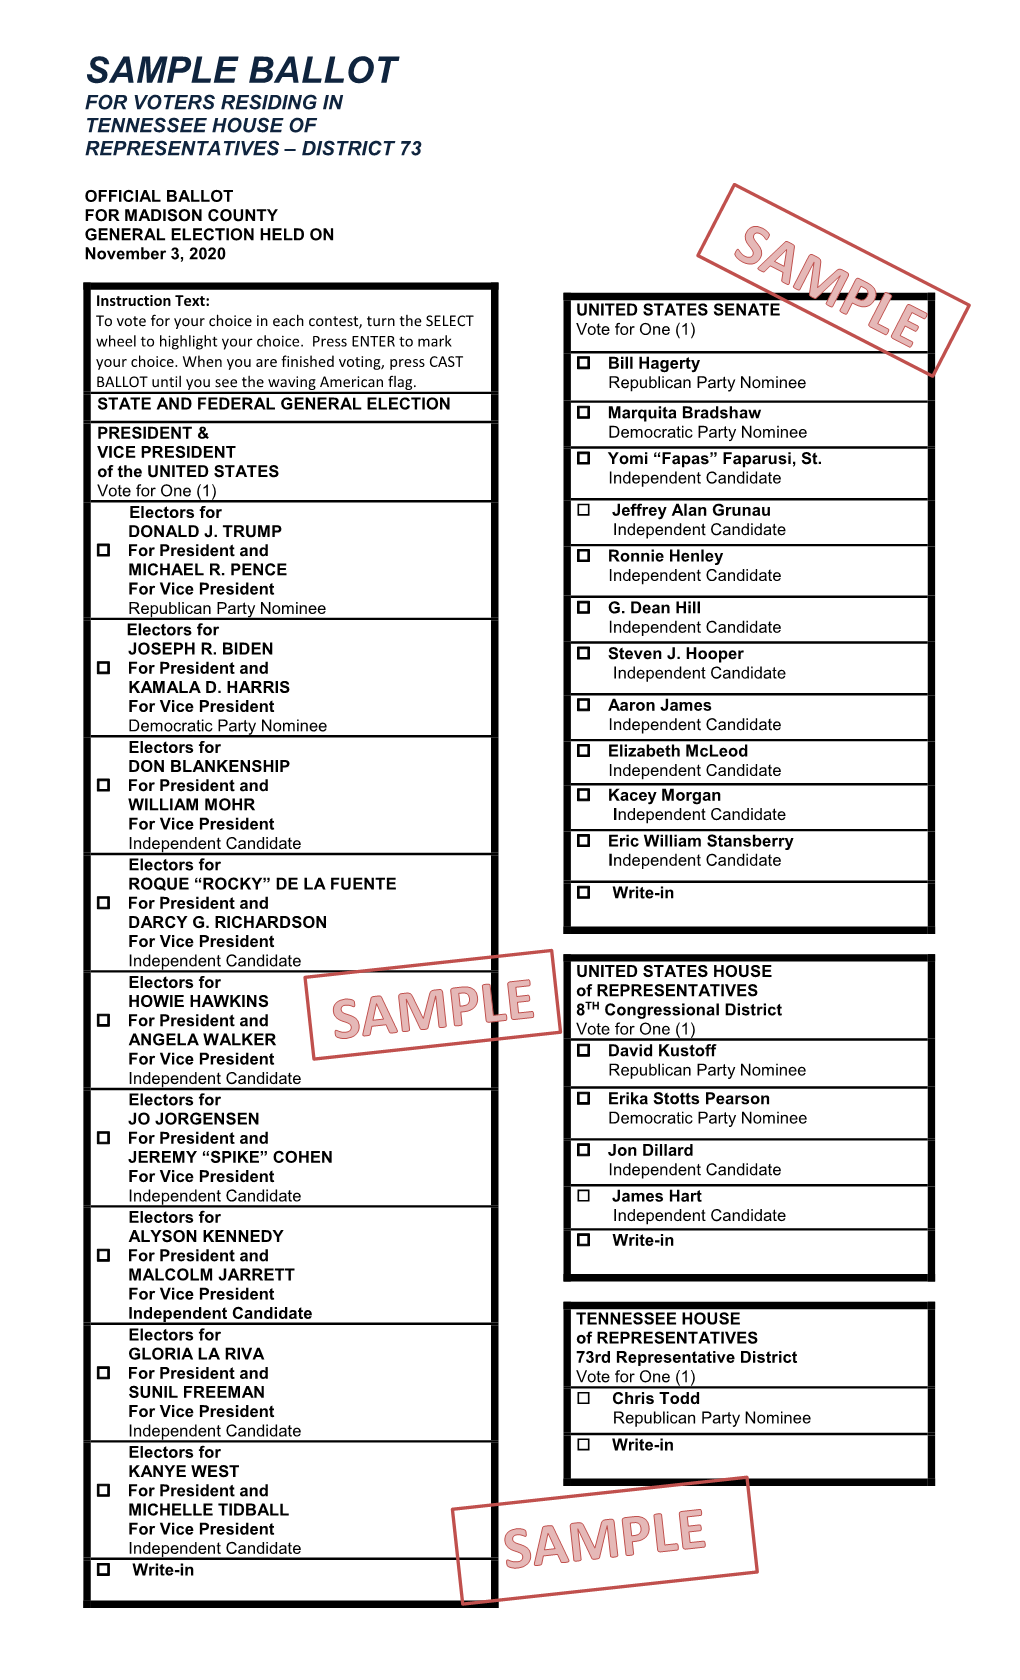 Sample Ballot for Voters Residing in Tennessee House of Representatives – District 73